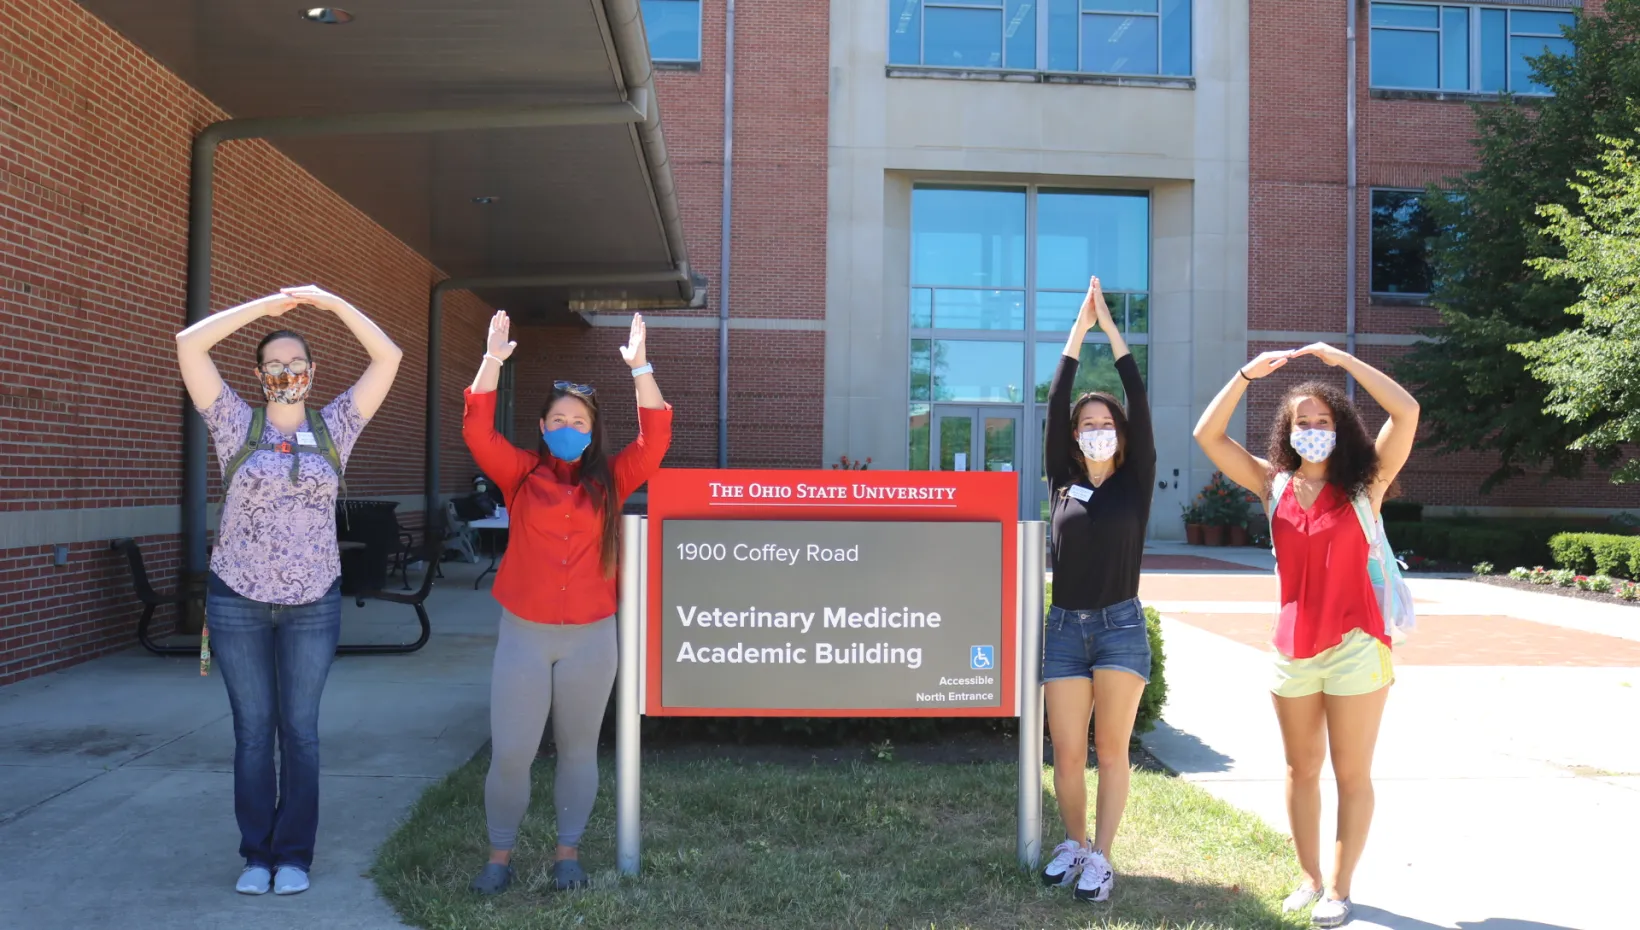 Four students posing in front of the Veterinary Medicine Academic Building sign